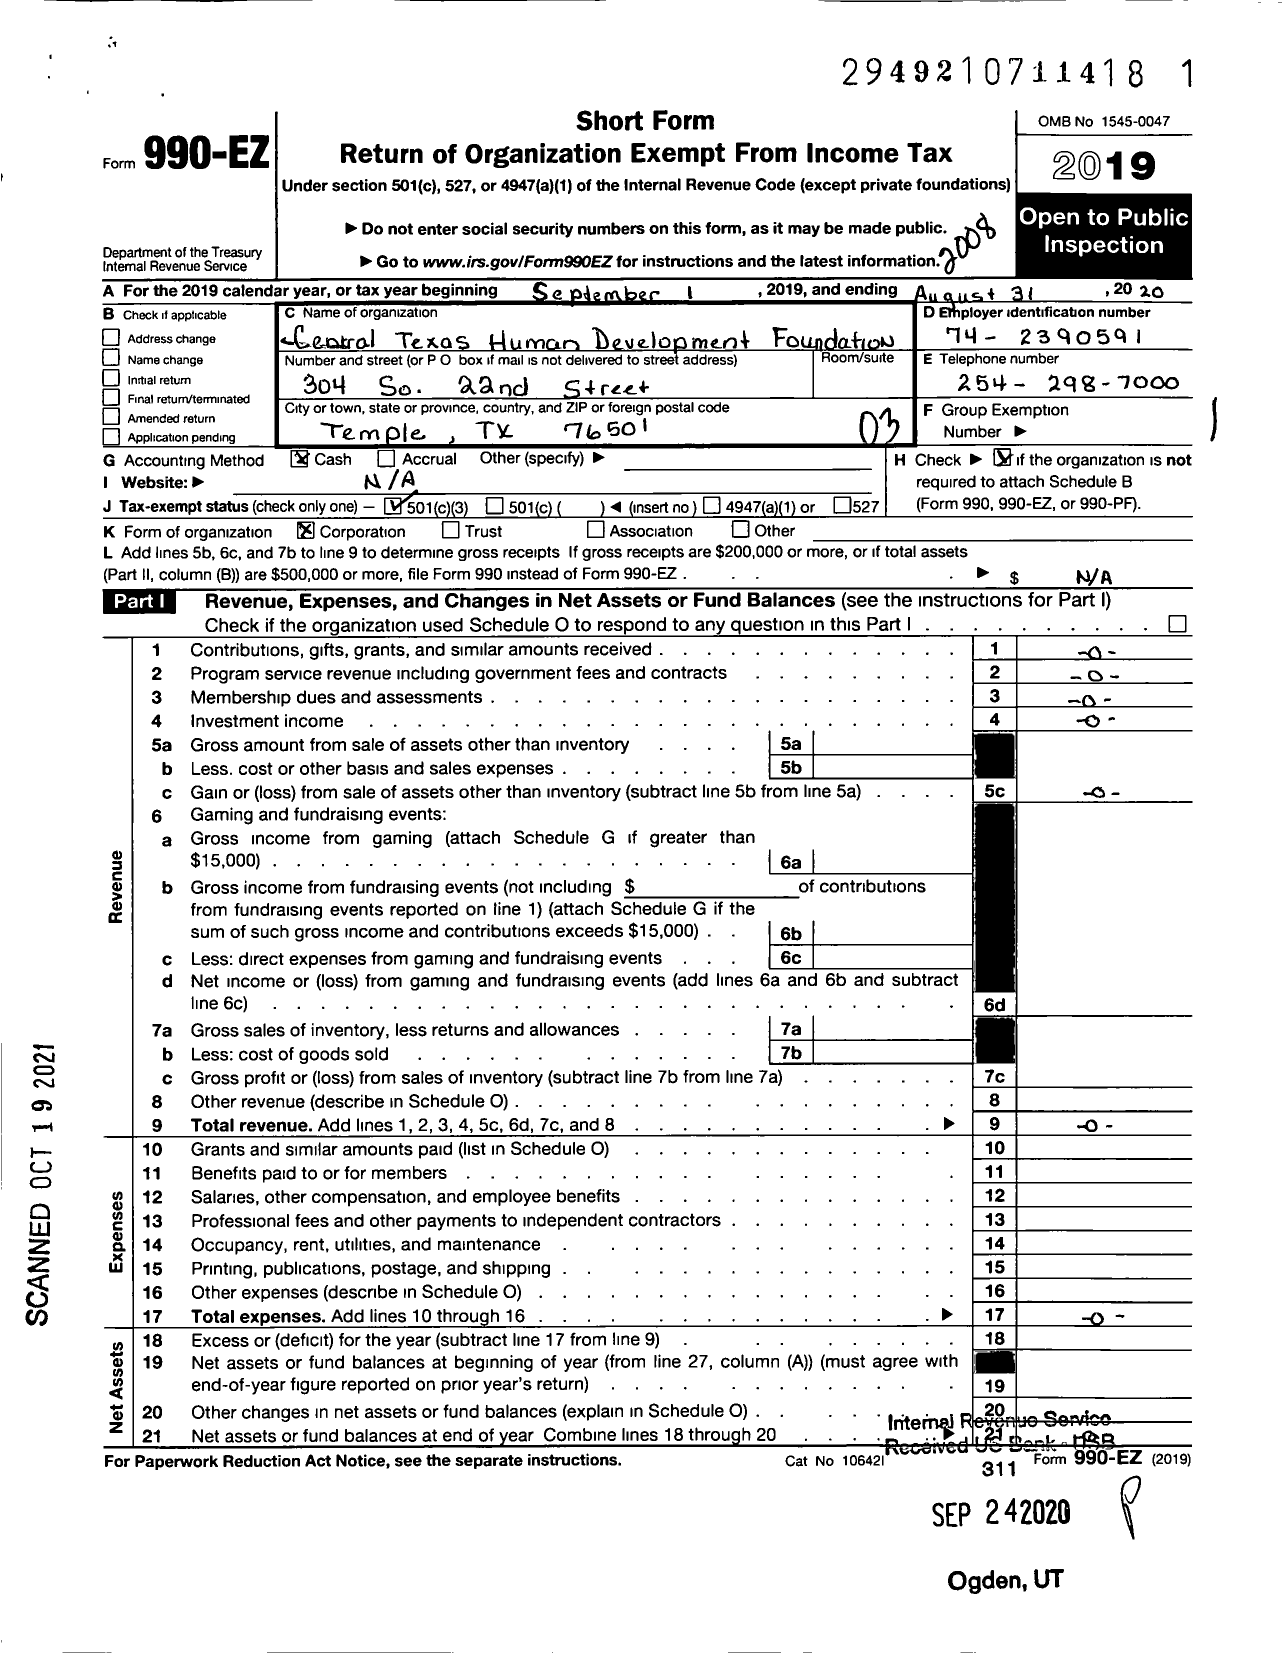 Image of first page of 2019 Form 990EZ for Central Texas Human Development Foundation